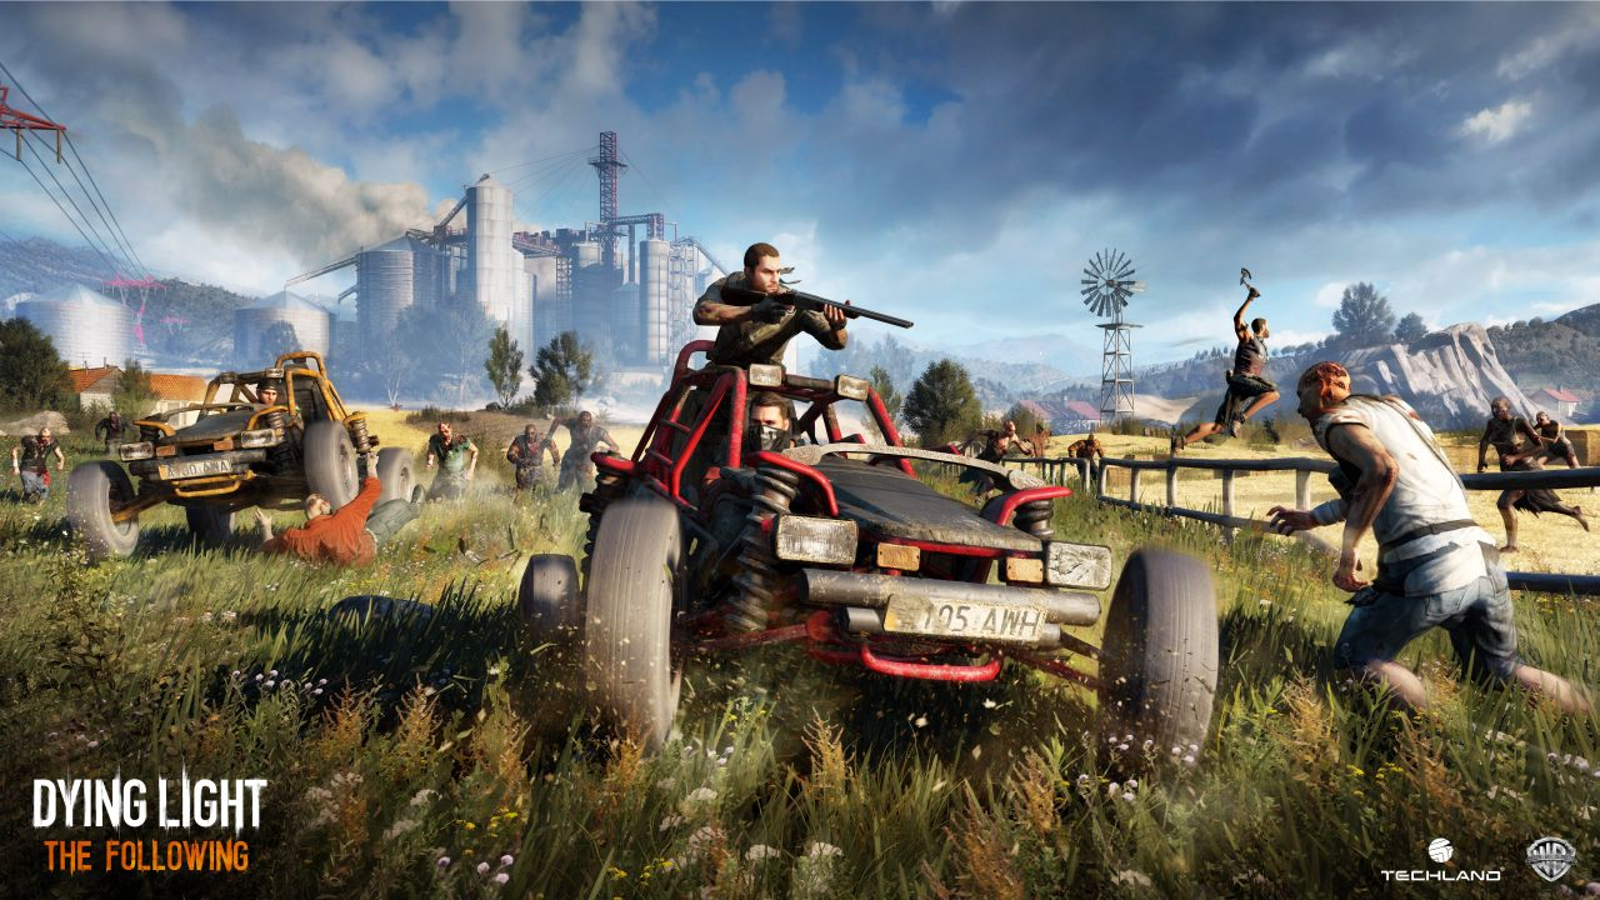 Dying Light The Following Enhanced Edition Gameplay 